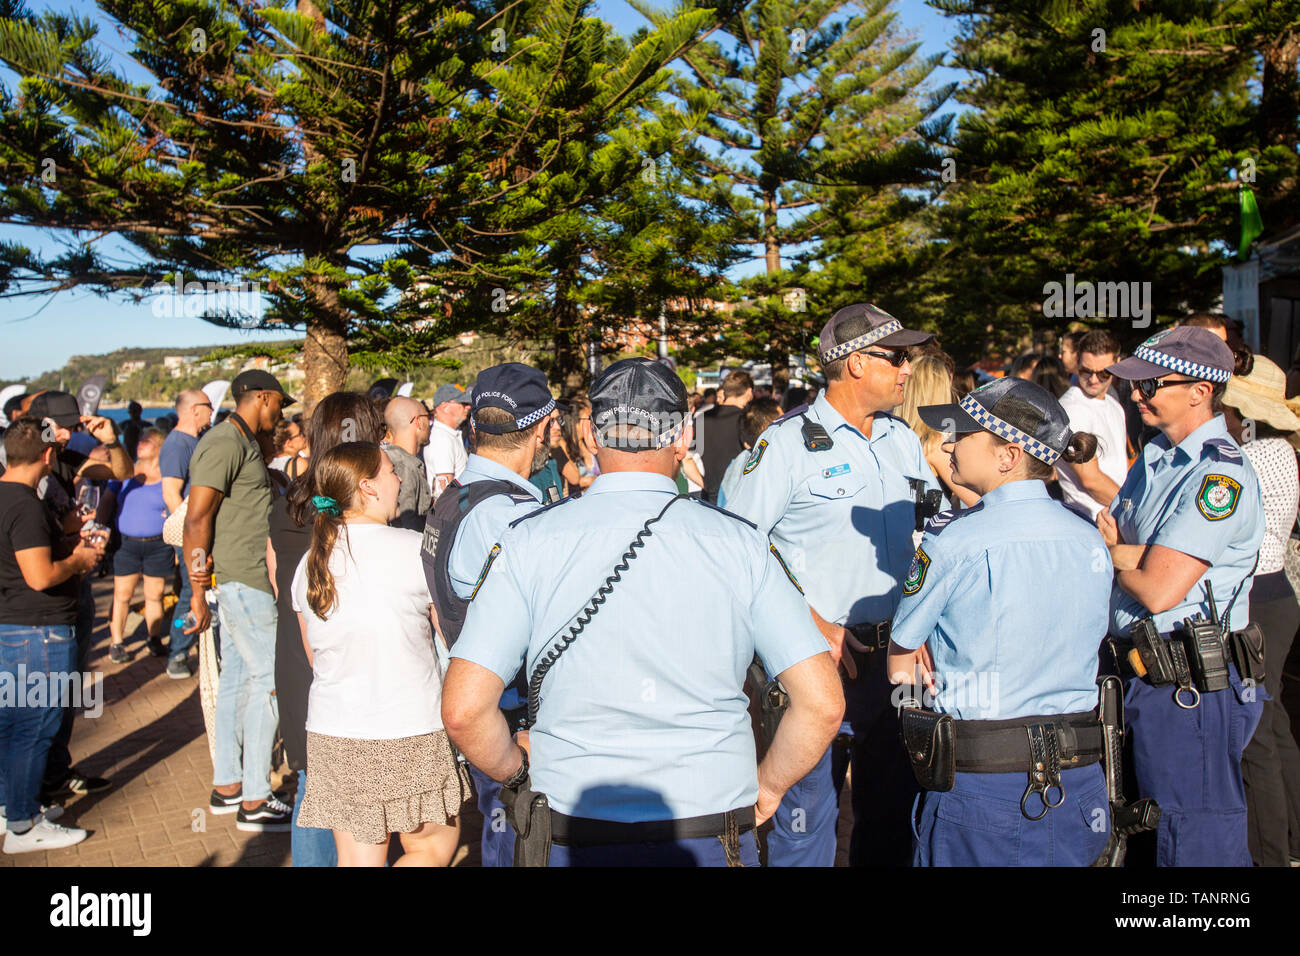 New South Wales police officers in a group at Taste of Manly food and wine festival in Sydney,Australia with male and female police officers Stock Photo